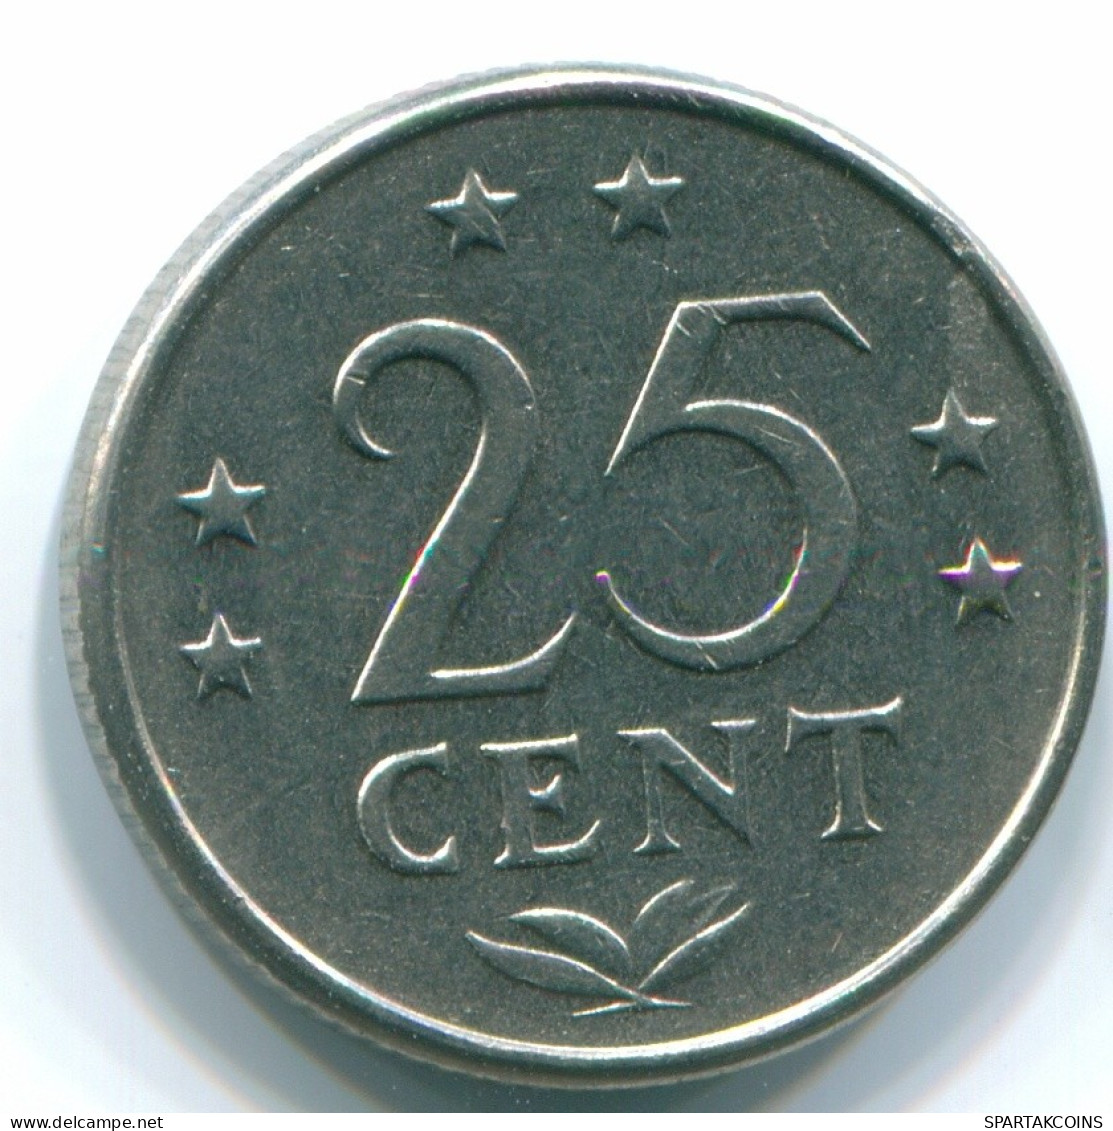 25 CENTS 1970 NETHERLANDS ANTILLES Nickel Colonial Coin #S11469.U.A - Netherlands Antilles